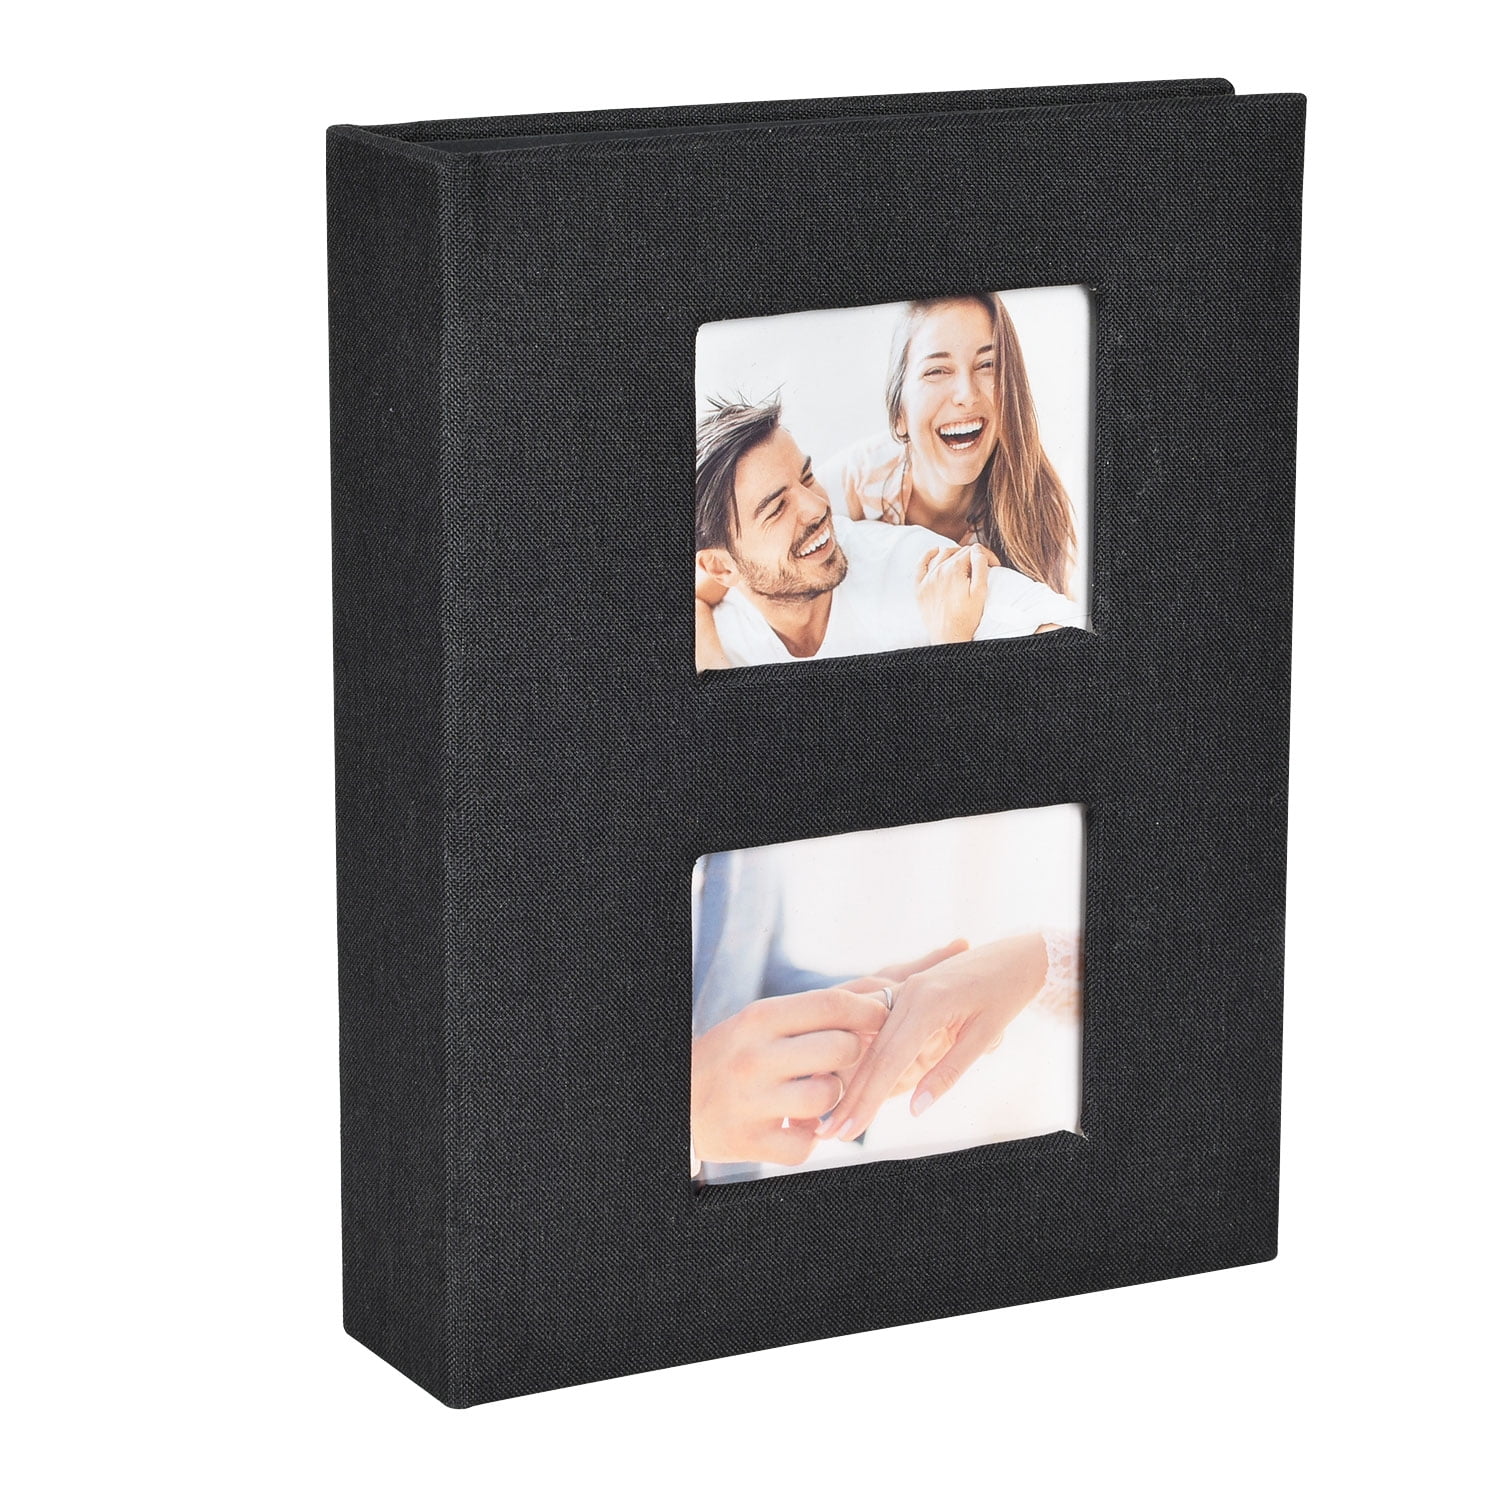  NESCL Linen Photo Album 4x6 Photos Hold 408 Slip-in Black  Pockets Picture Book, Fabric Cover Small Photo Albums for Wedding  Anniversary Family Baby Christmas Gifts Beige : Home & Kitchen